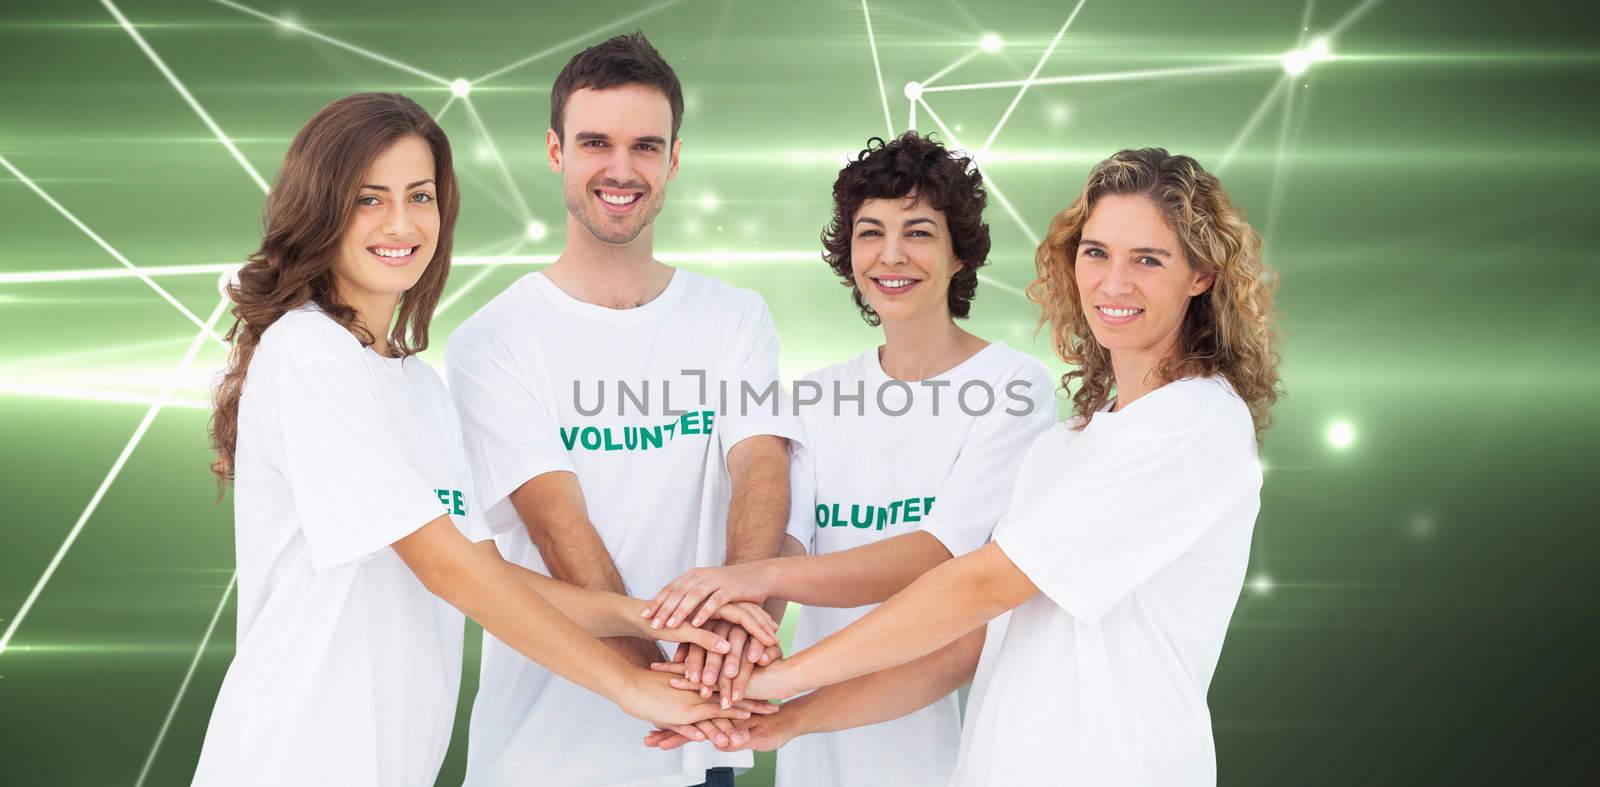 Composite image of smiling volunteer group piling up their hands by Wavebreakmedia